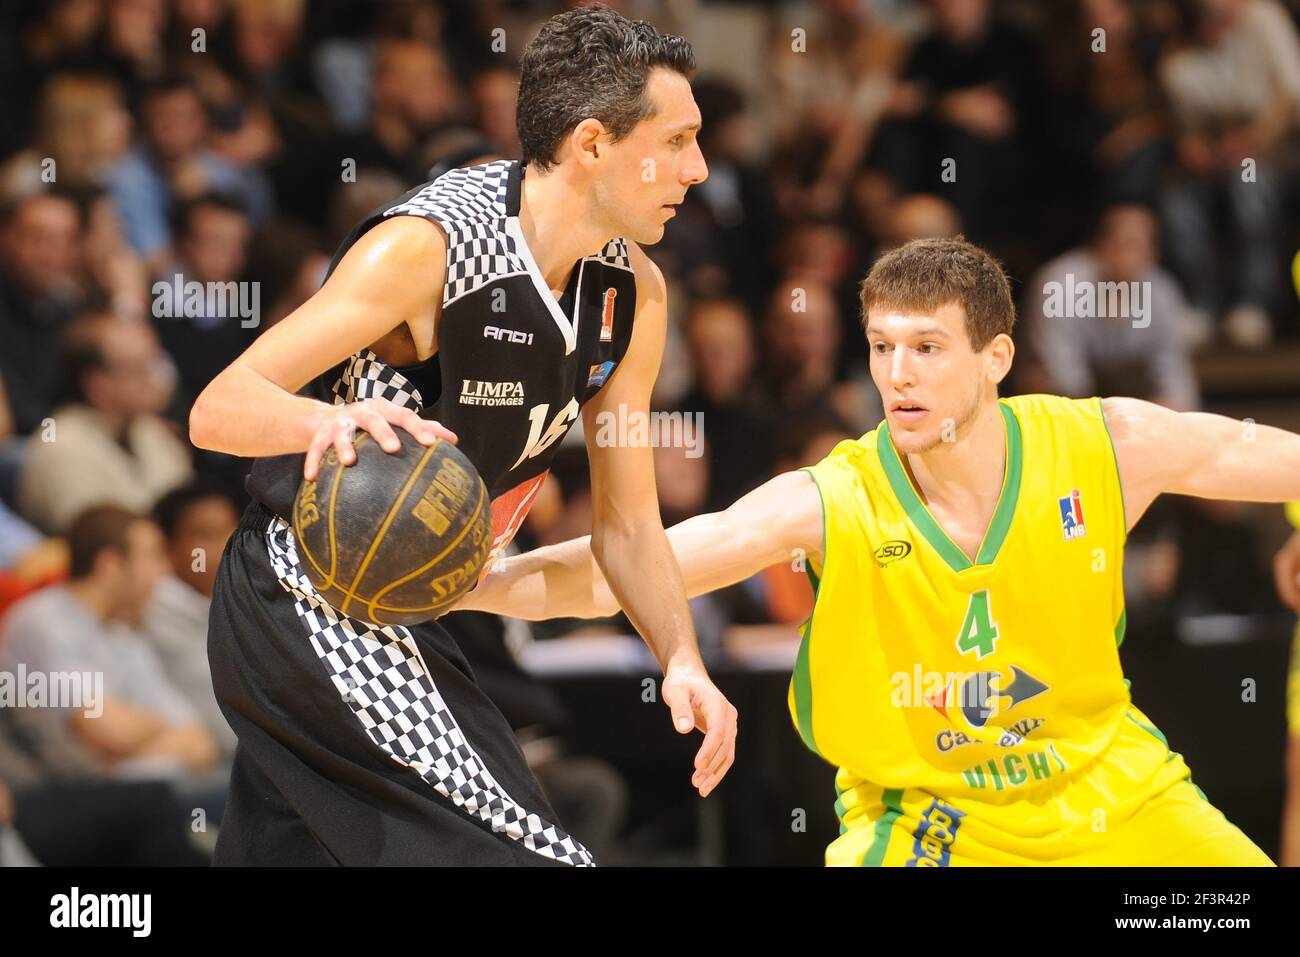 BASKETBALL - SEMAINE DES AS 2010 - VILLEURBANNE (FRA) - 18 TO 21/02/2010 -  PHOTO : PASCAL ALLEE / HOT SPORTS / DPPI - LAURENT SCIARRA (ORLEANS) /  ANTOINE EITO (VICHY Stock Photo - Alamy